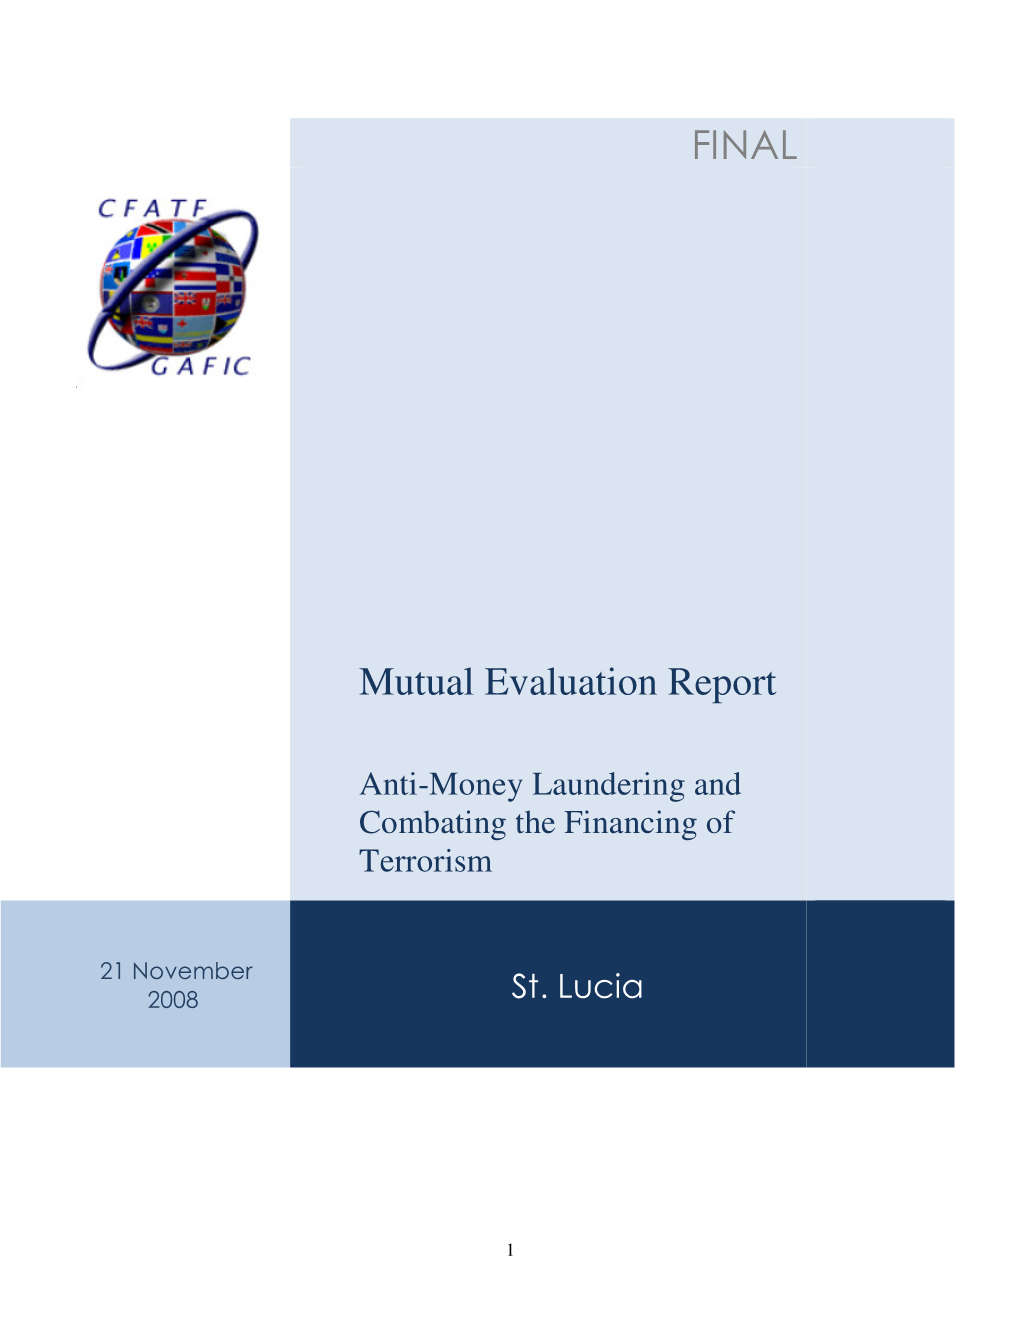 FINAL Mutual Evaluation Report